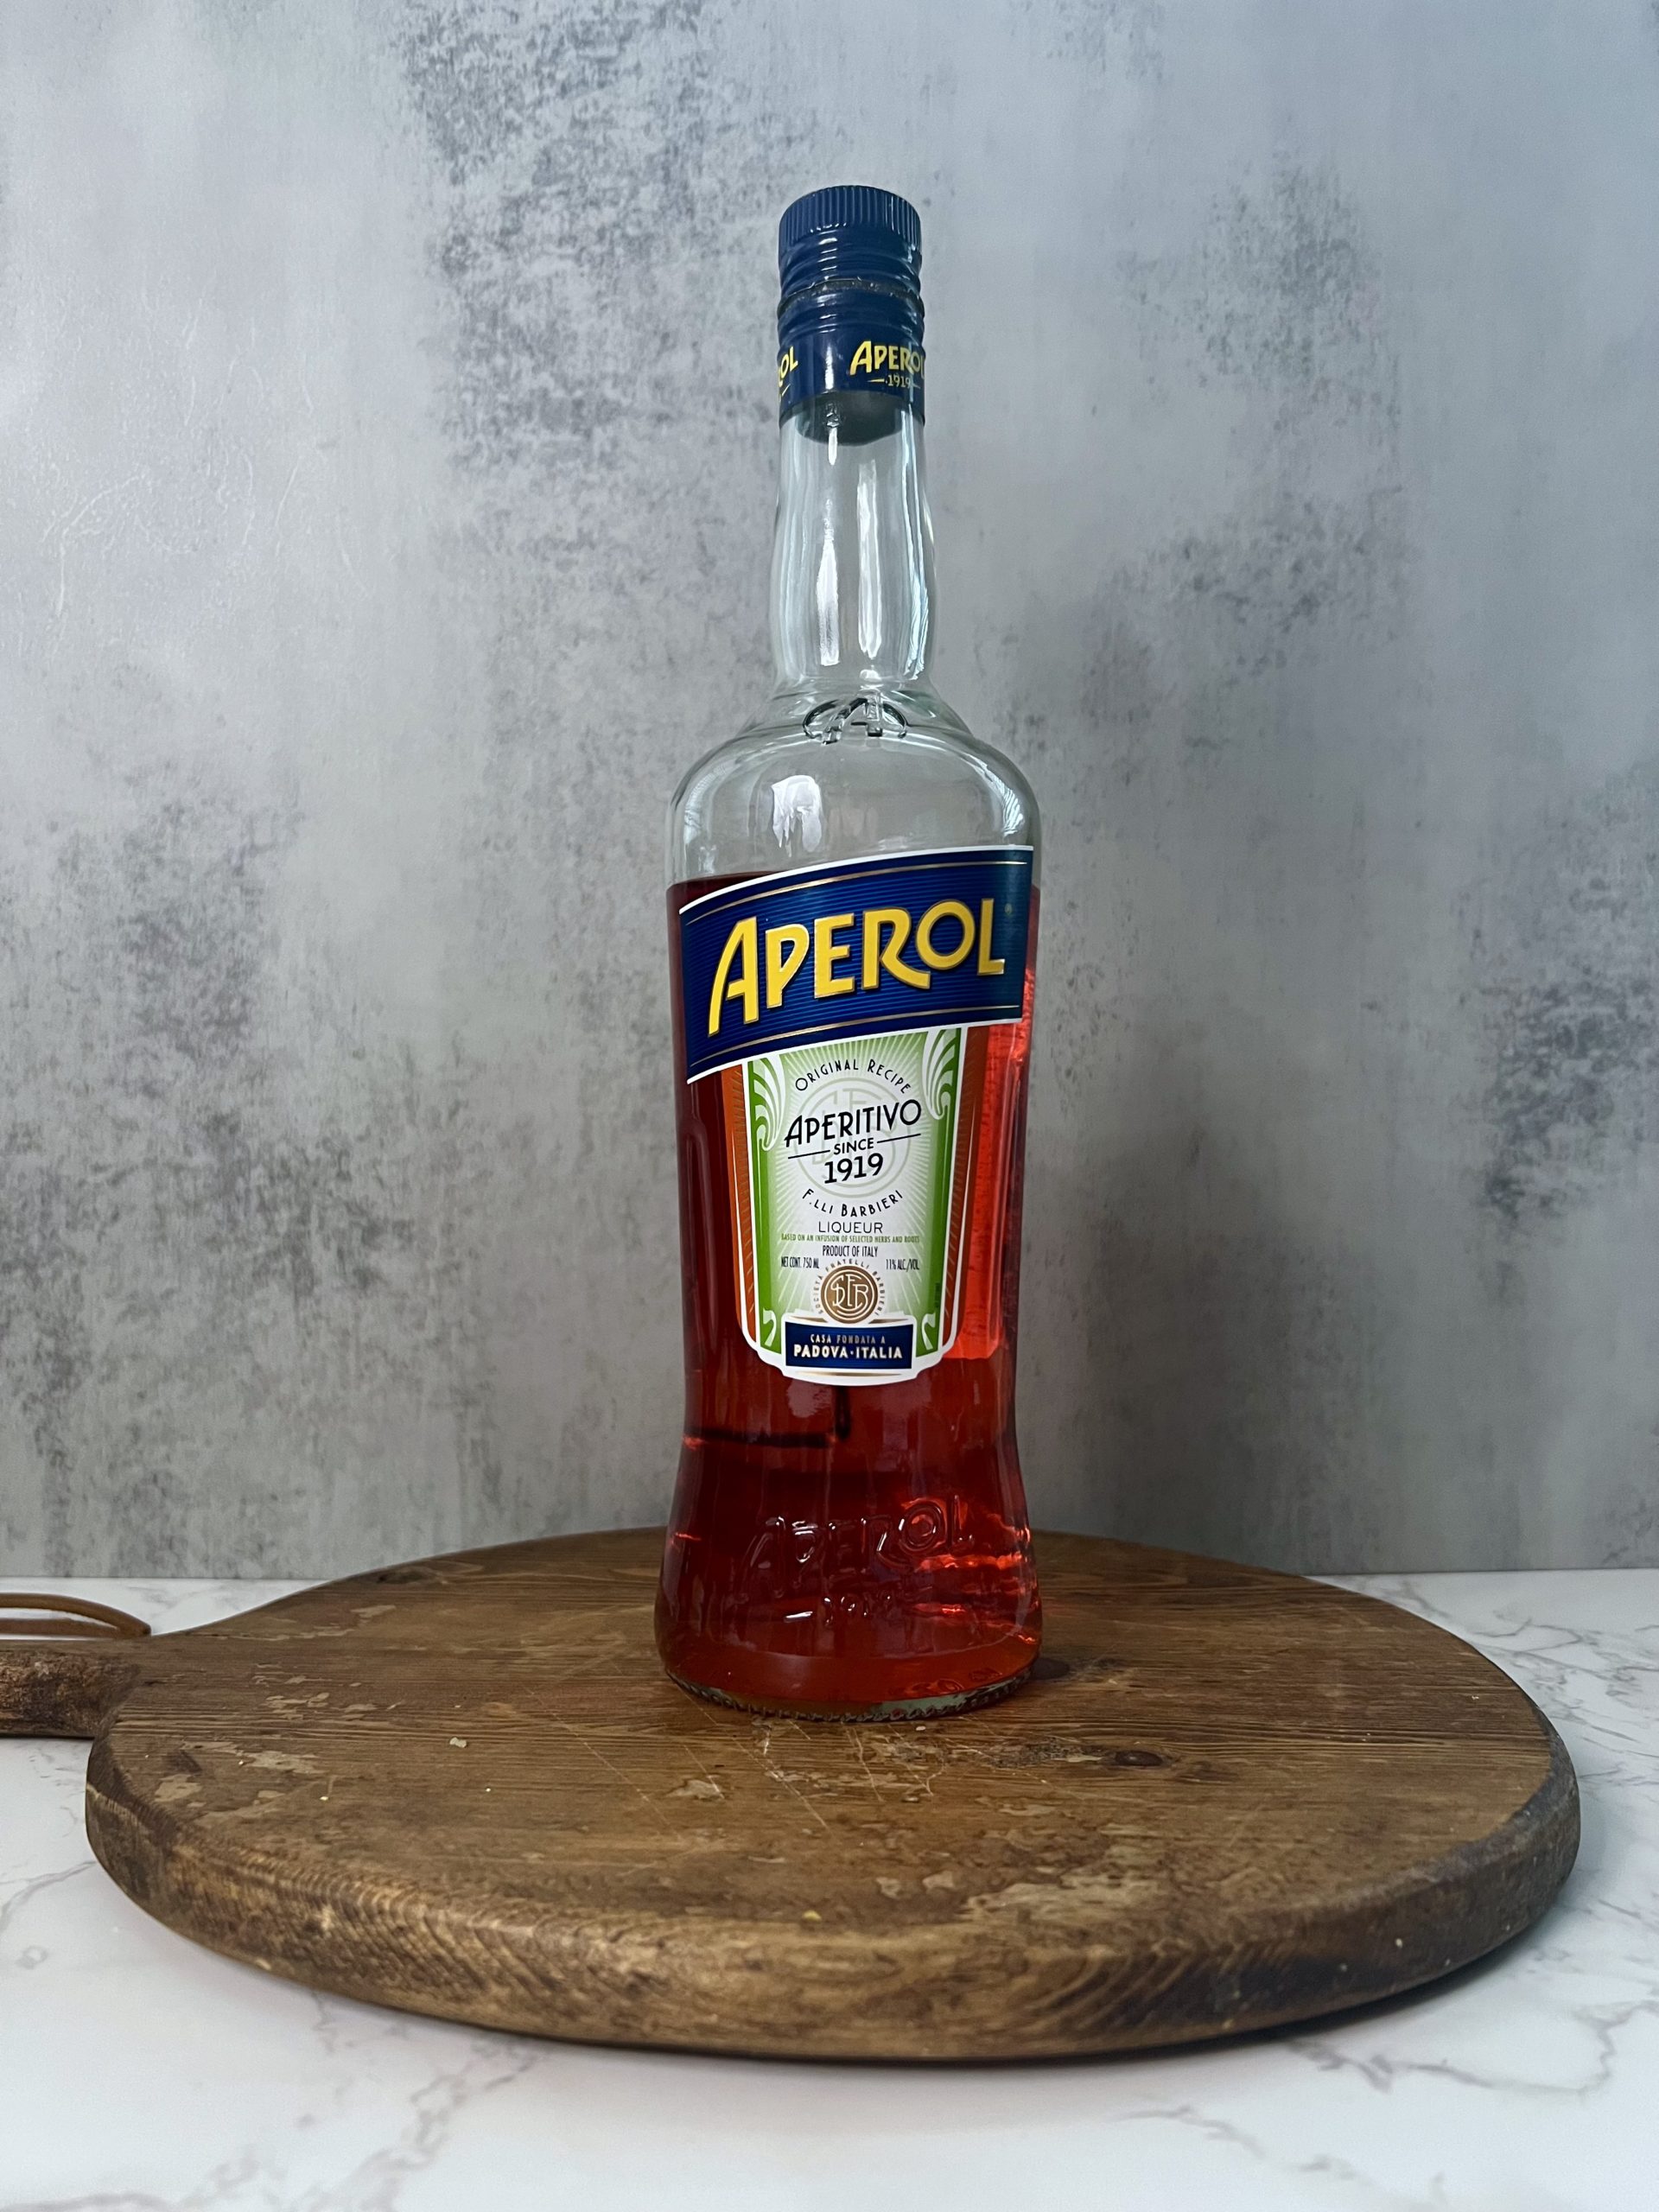 A bottle of Aperol on a countertop.